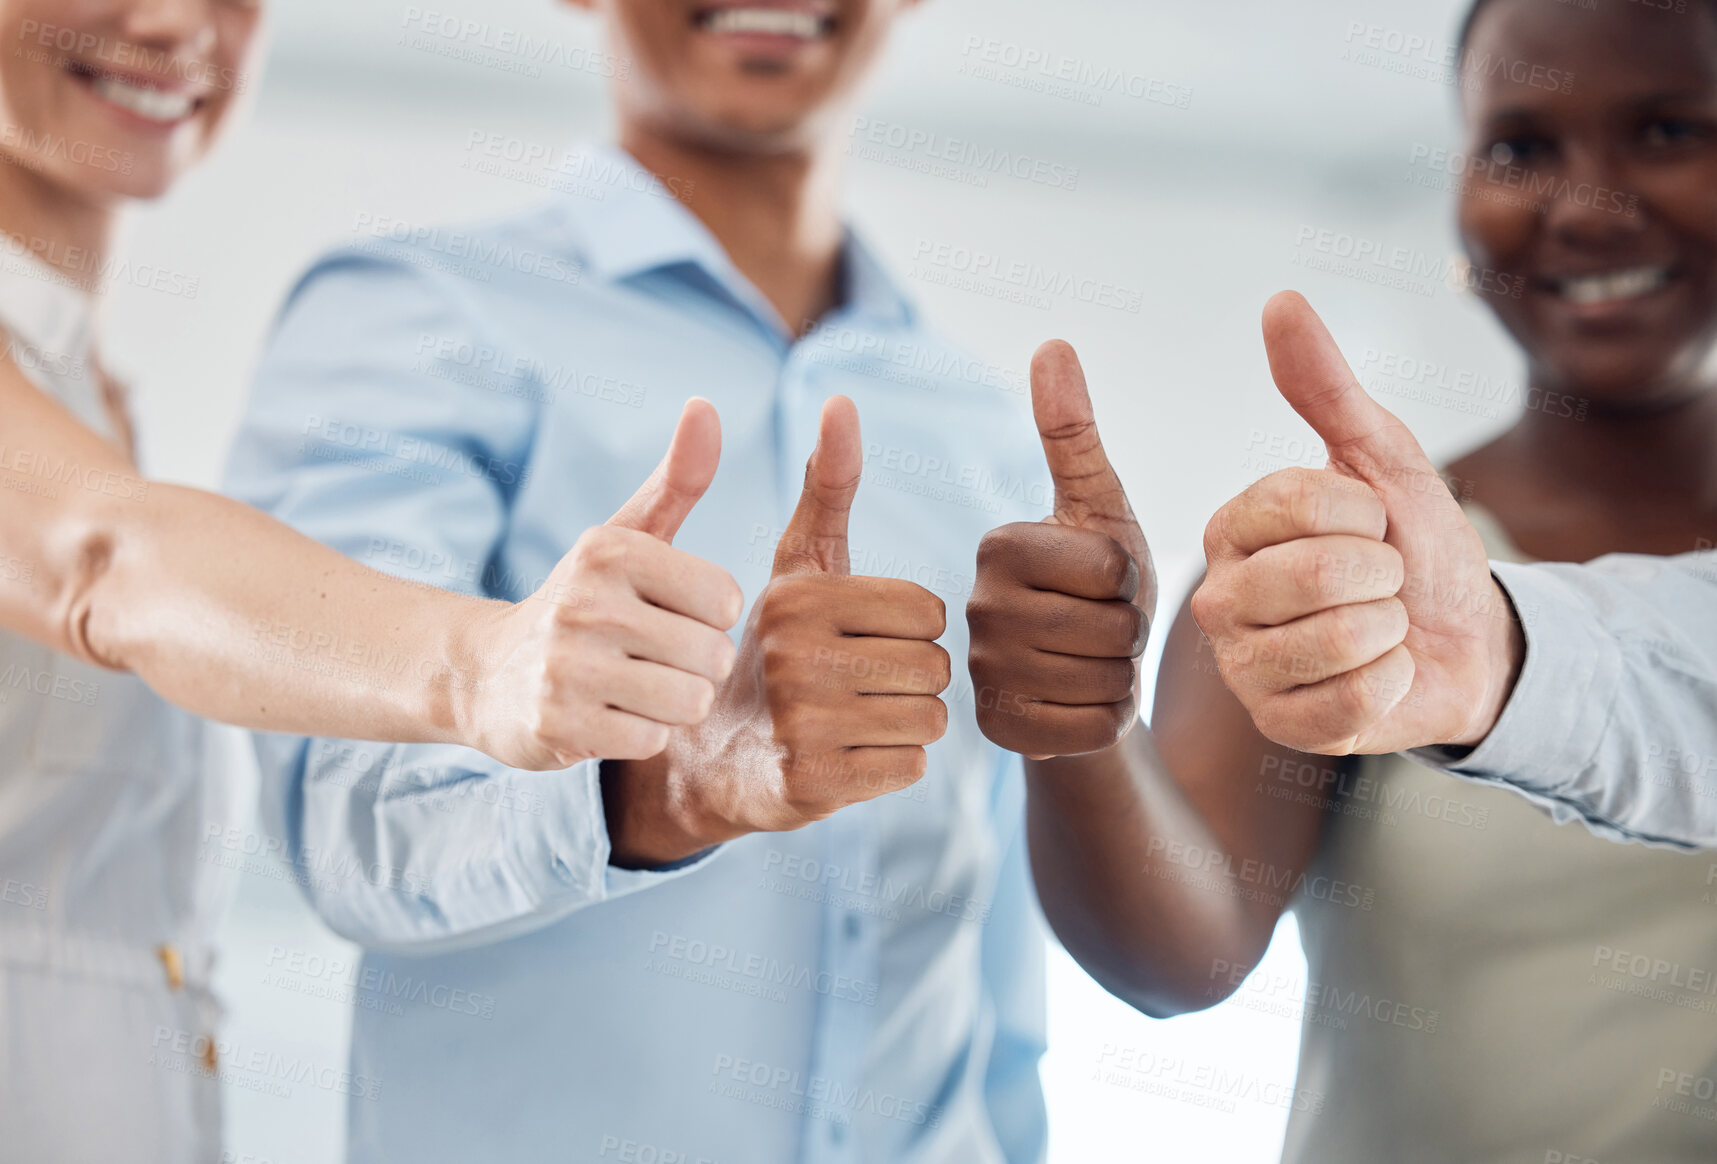 Buy stock photo Corporate thumbs up and teamwork with success hands for  business workforce development and motivation. Agreement, partnership and winning achievement together in professional work team.